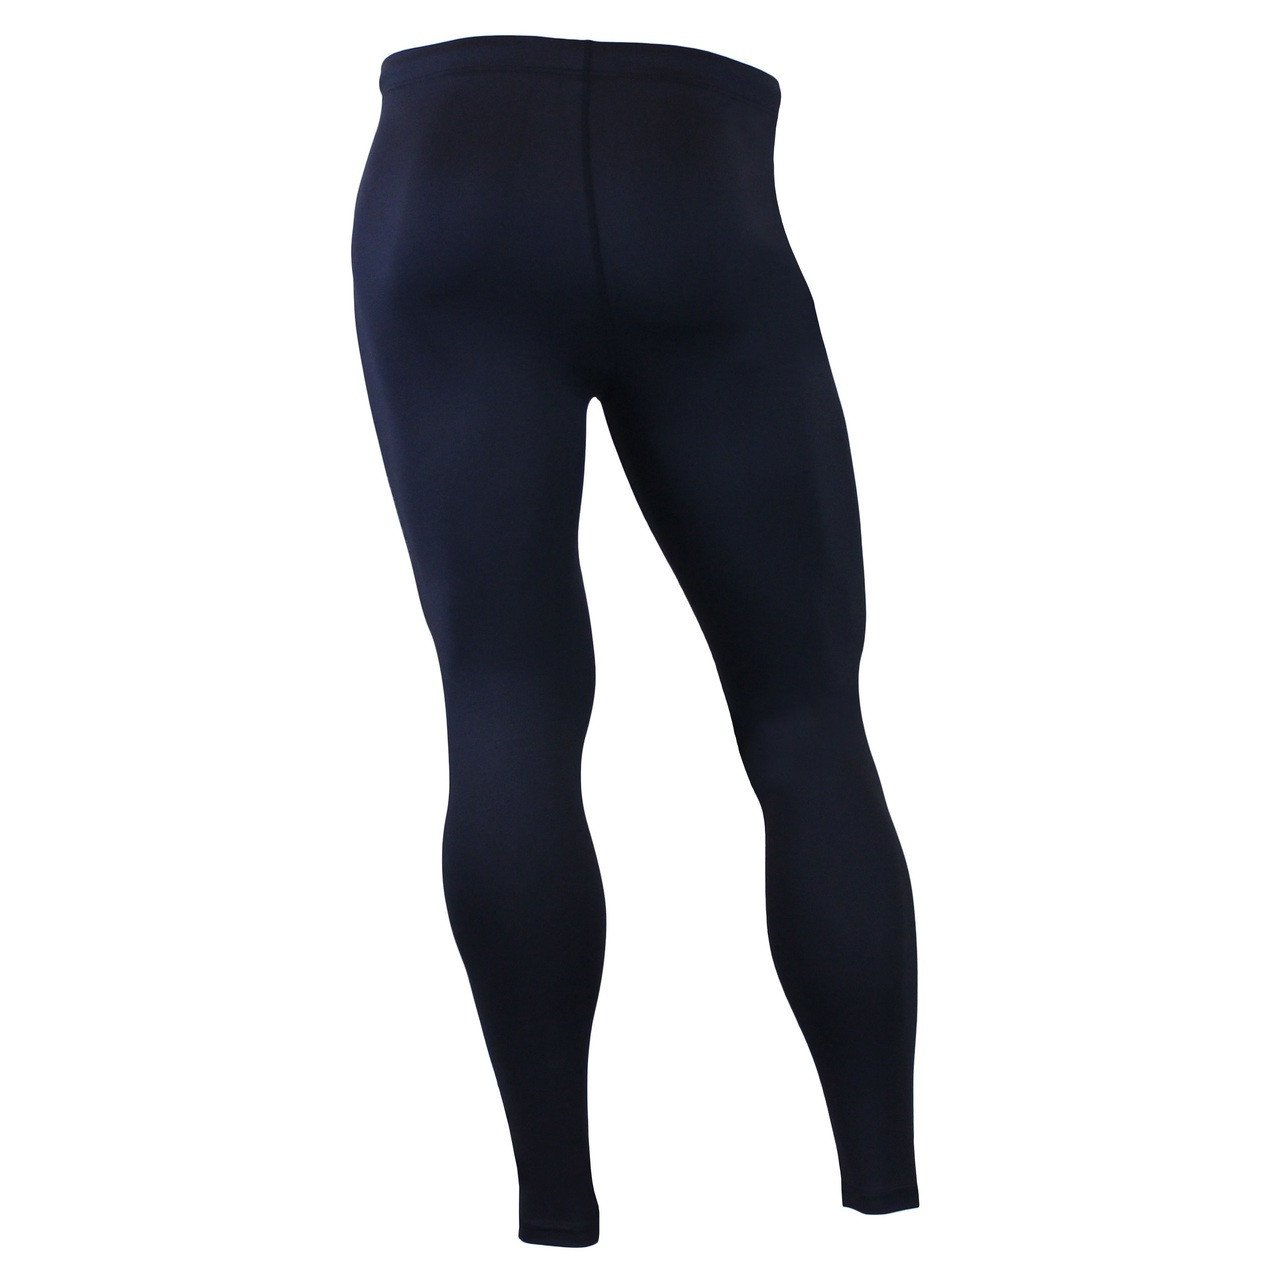 Men's Compression Pants, Athletic Base Layer Tights Quick Dry